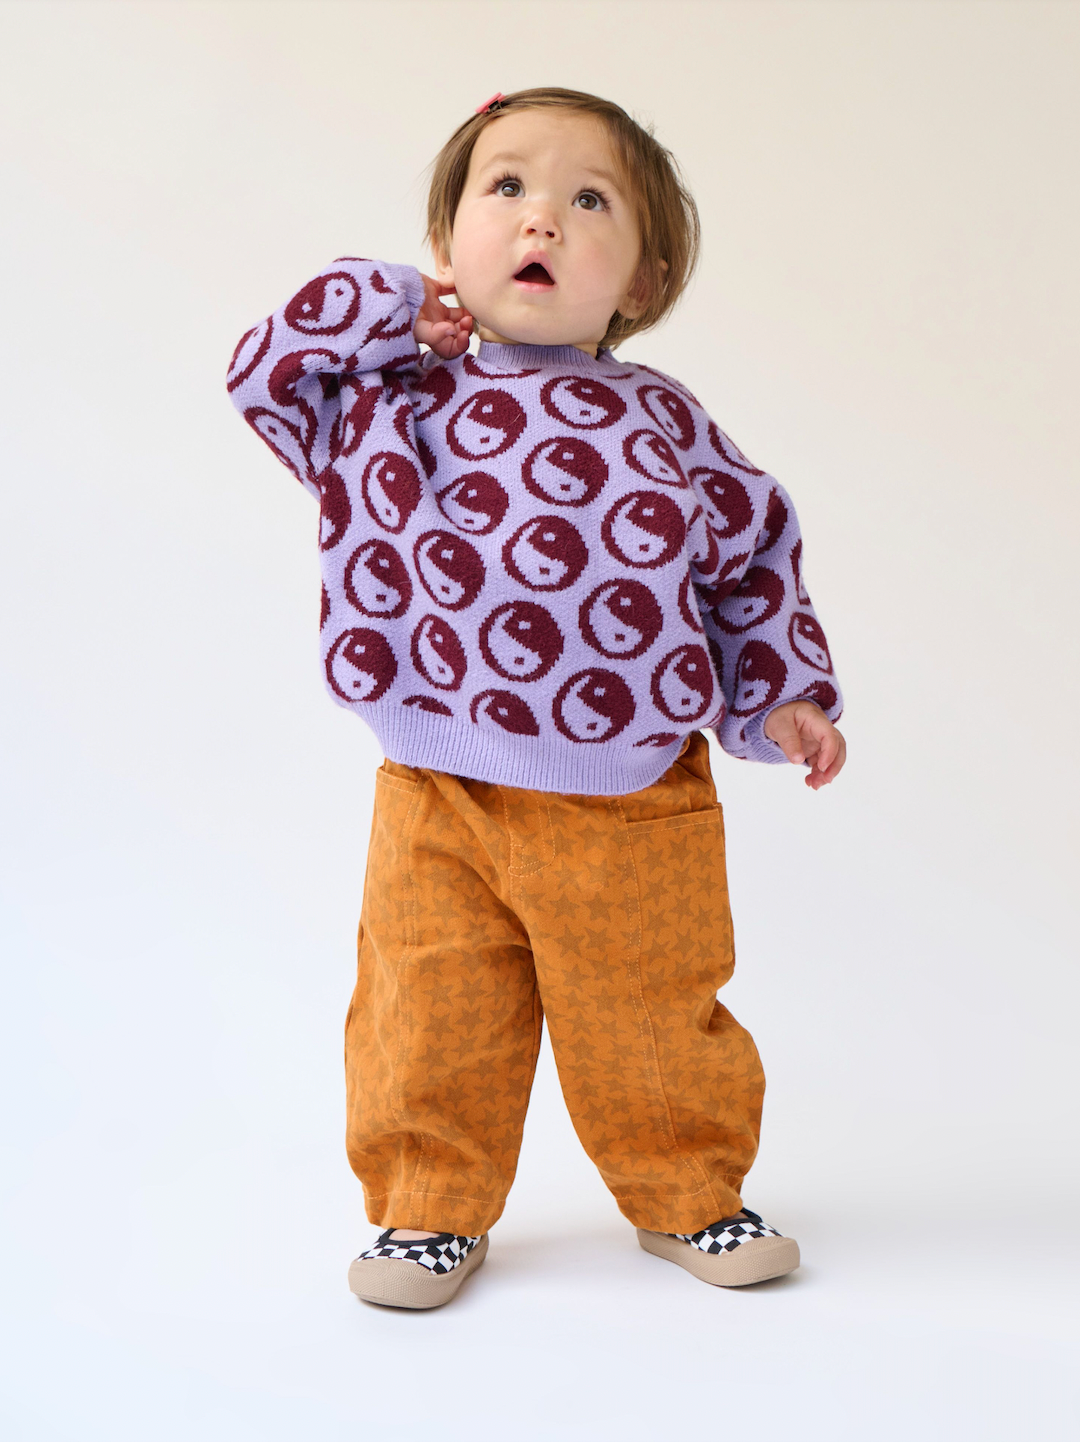 A toddler wearing a kid's sweater patterned with dark red yin and yang circles on a violet background